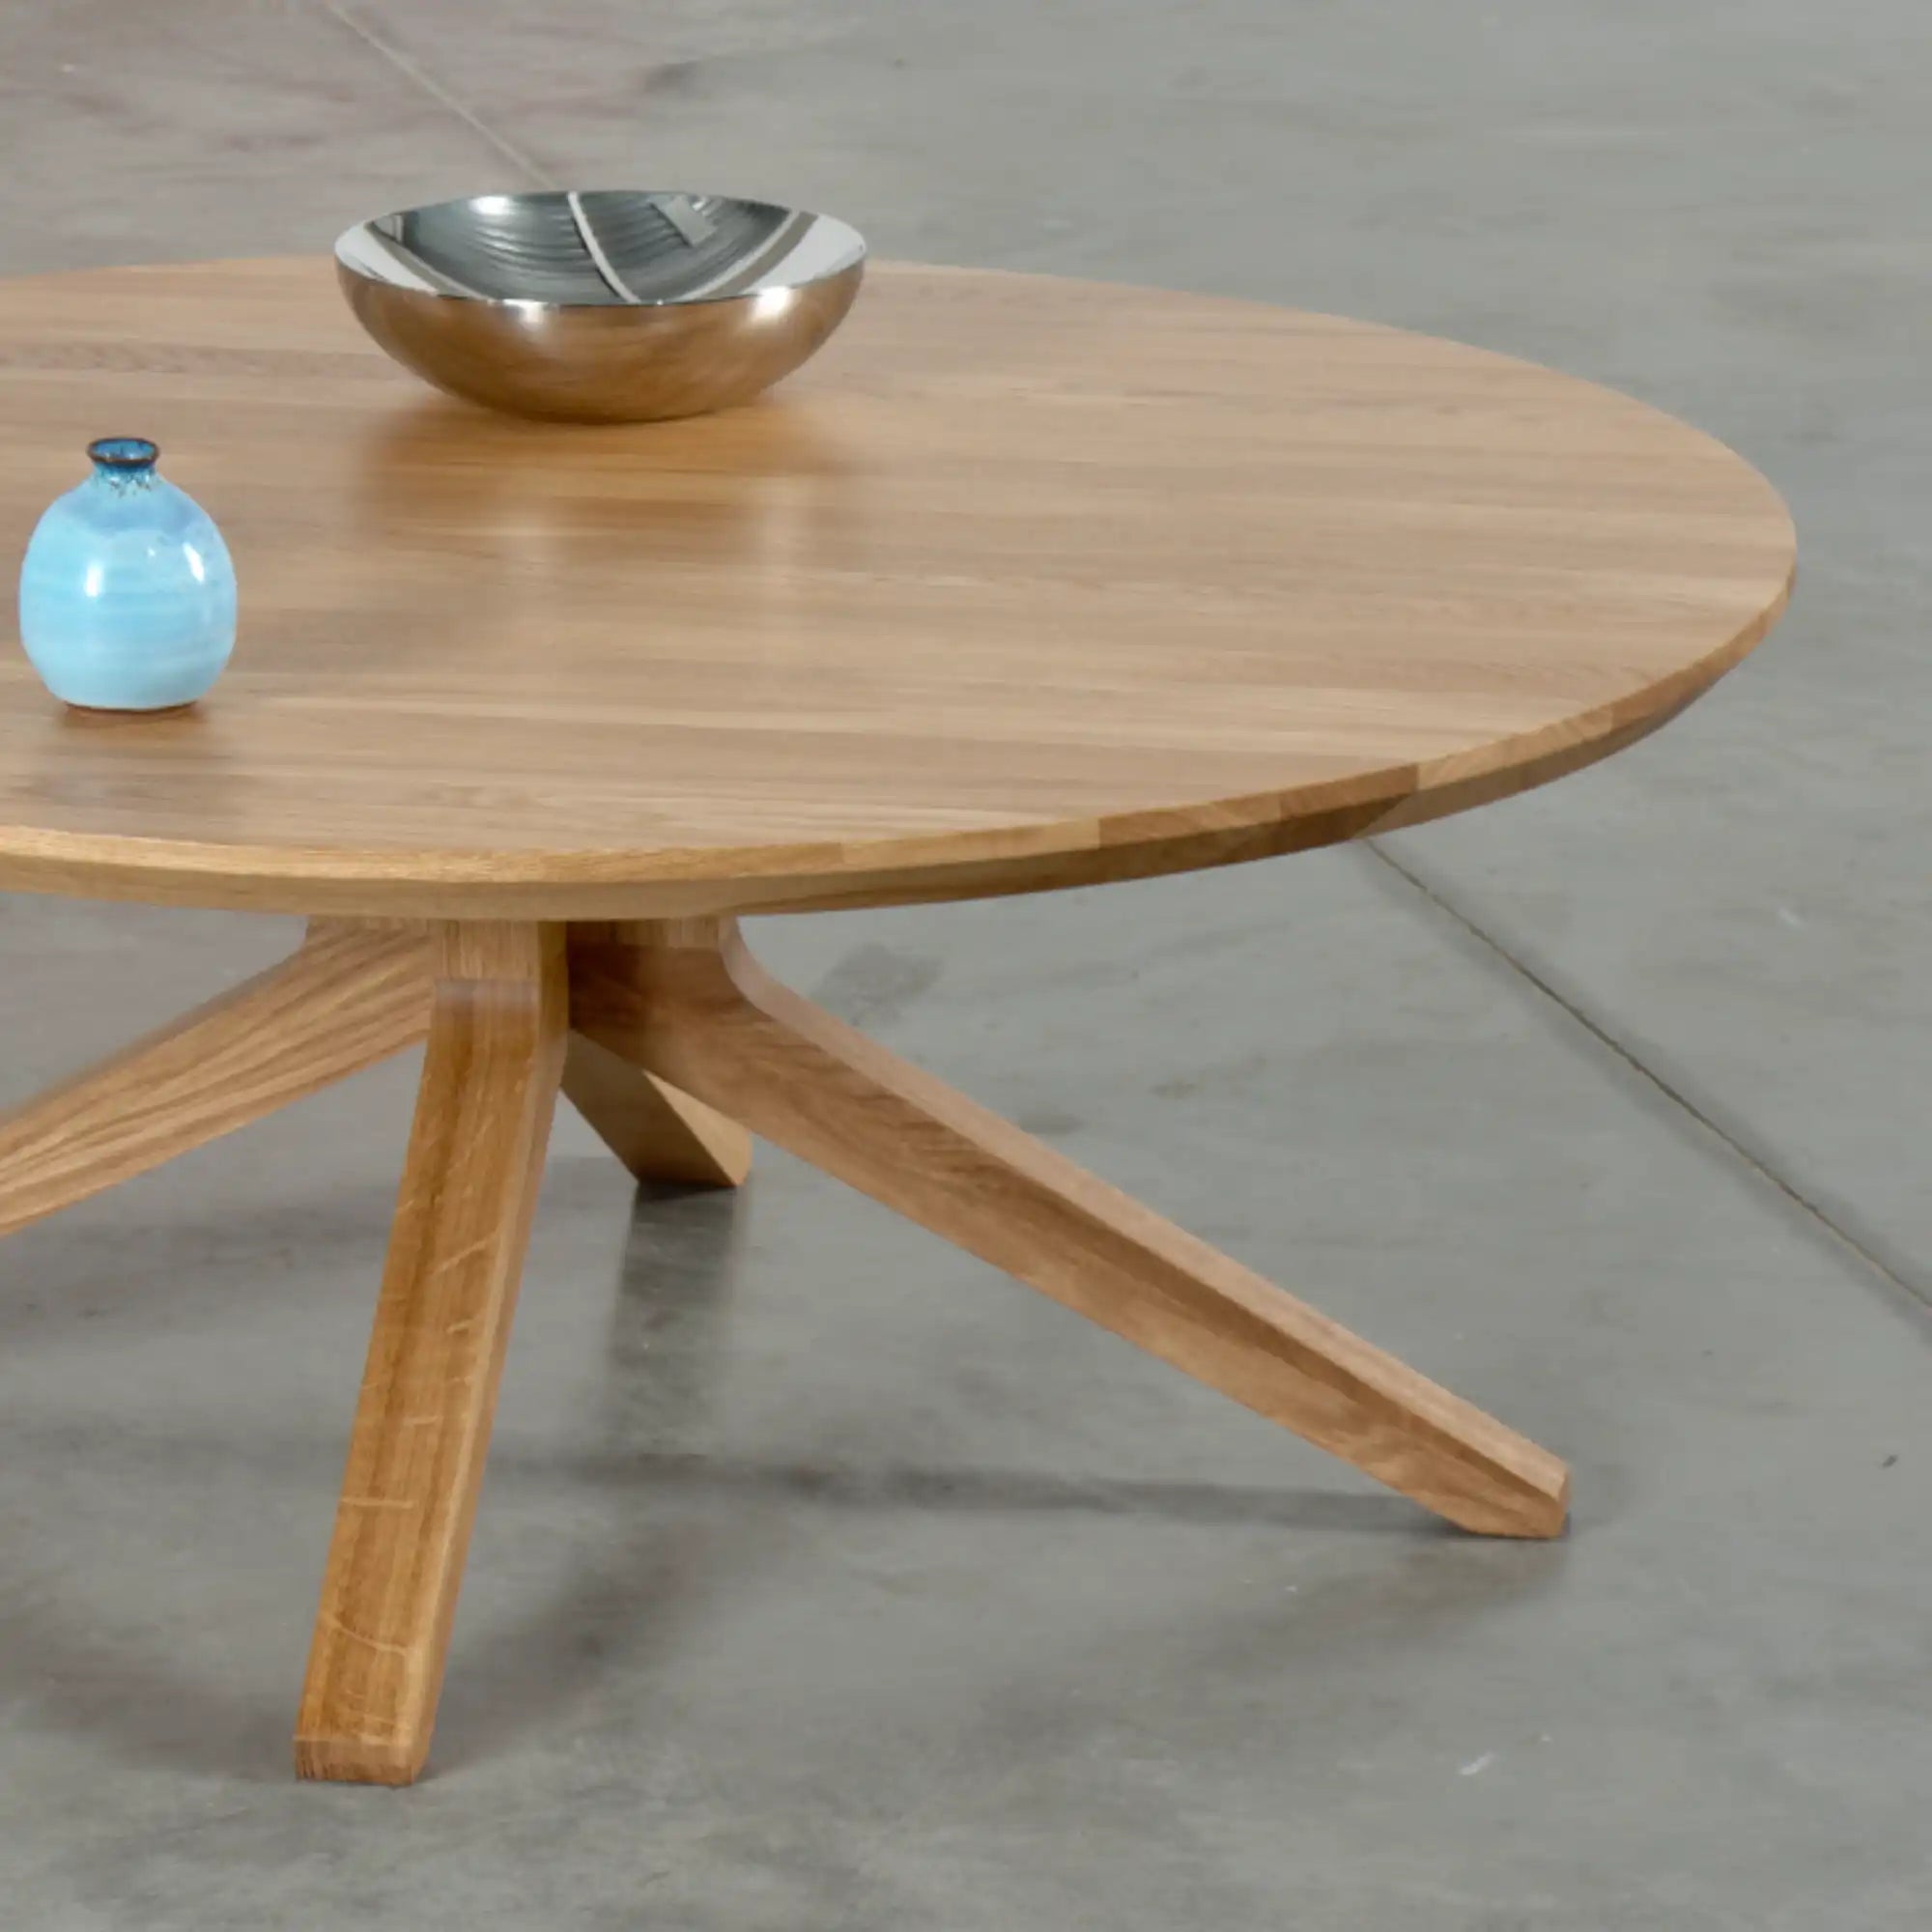 Cross Round Coffee Table